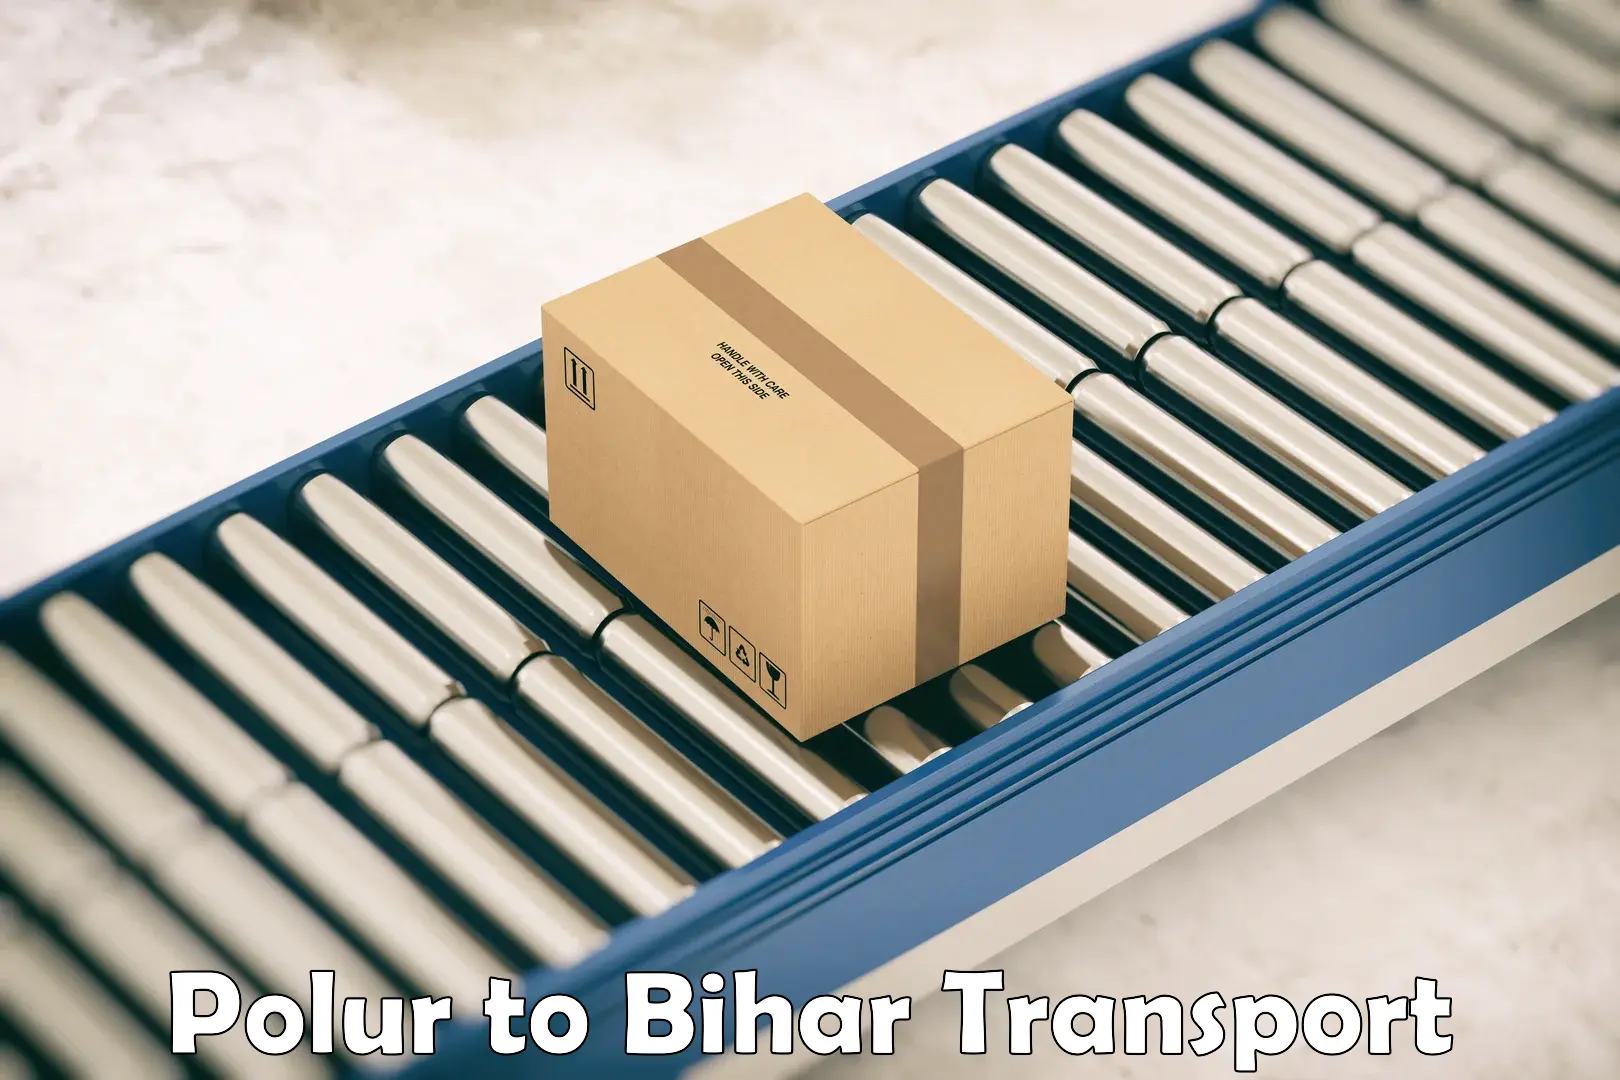 Commercial transport service Polur to Bhorey